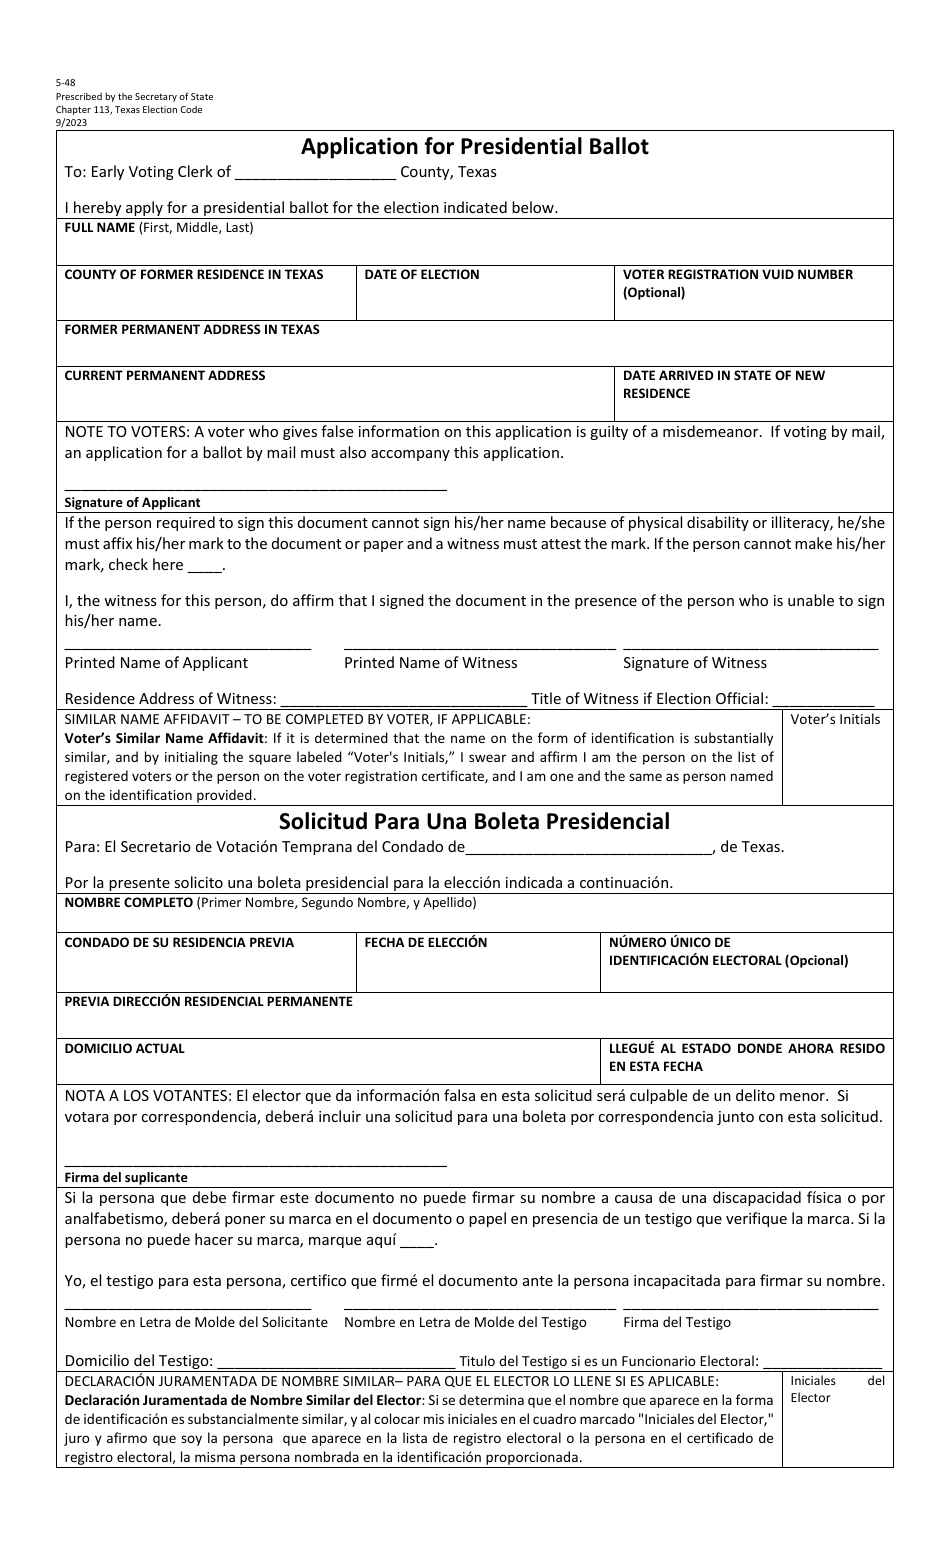 Form 5-48 Application for Presidential Ballot - Texas (English / Spanish), Page 1